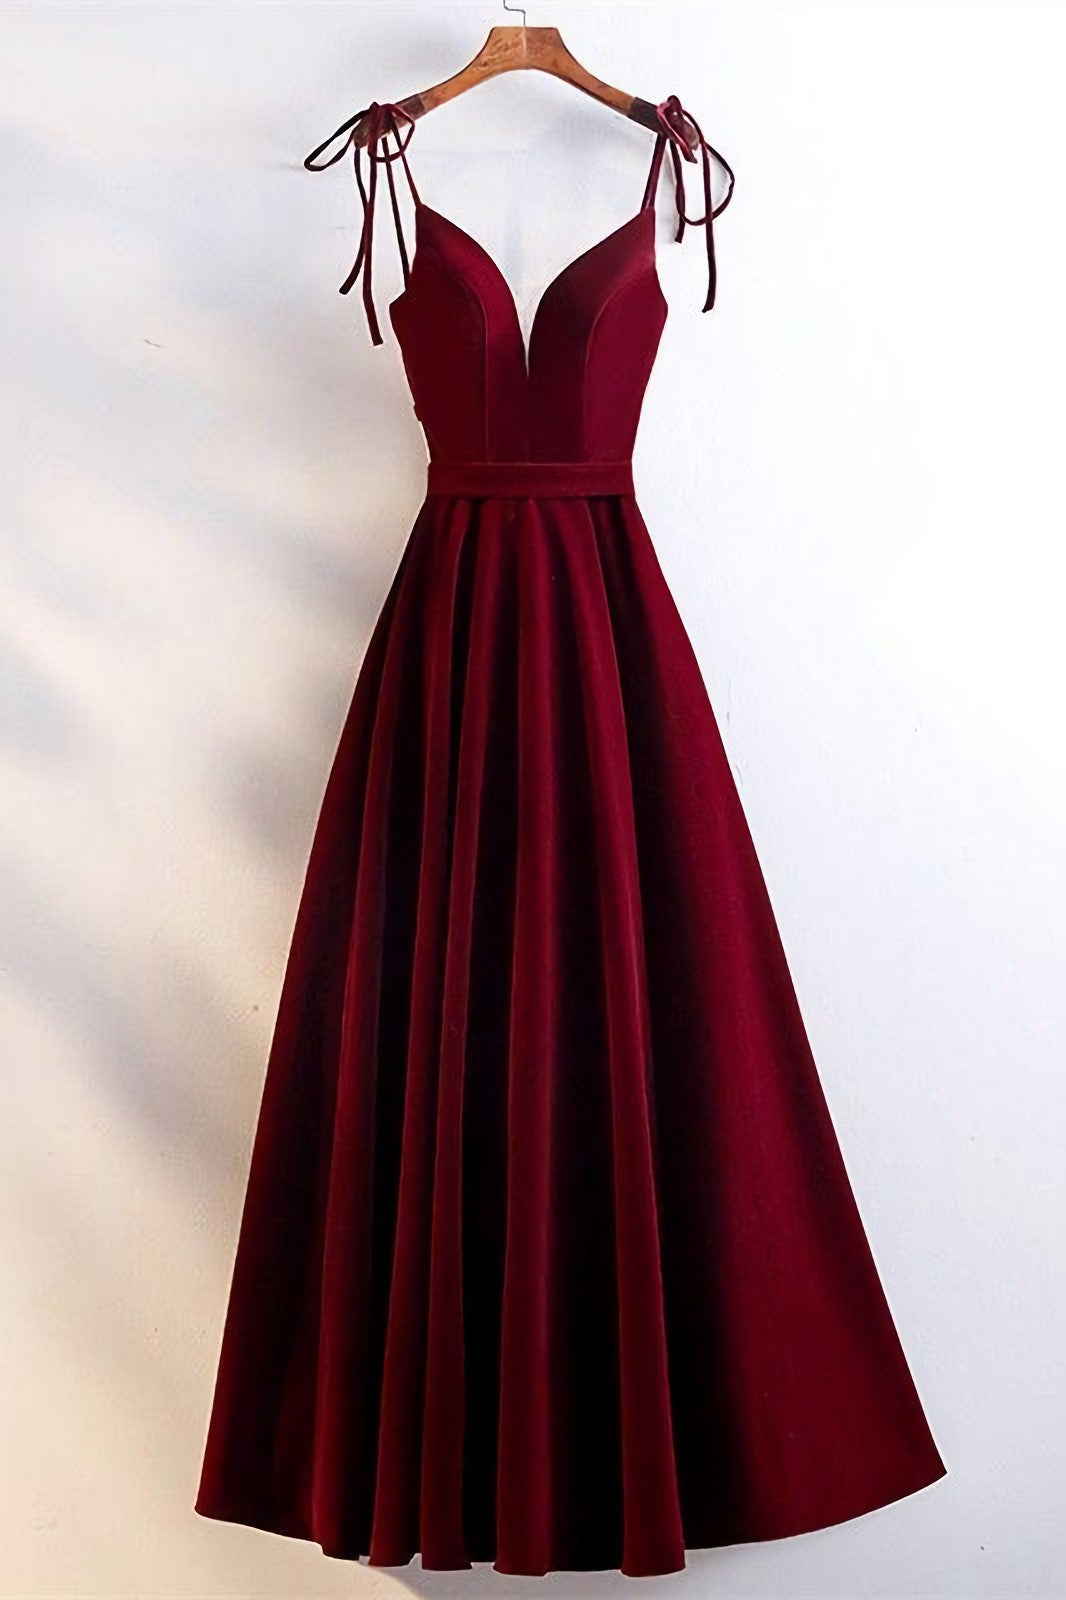 Party Dresses Classy, Gorgeous Sweetheart Spaghetti Straps Corset Red Velvet Long A Line Prom Evening Dress